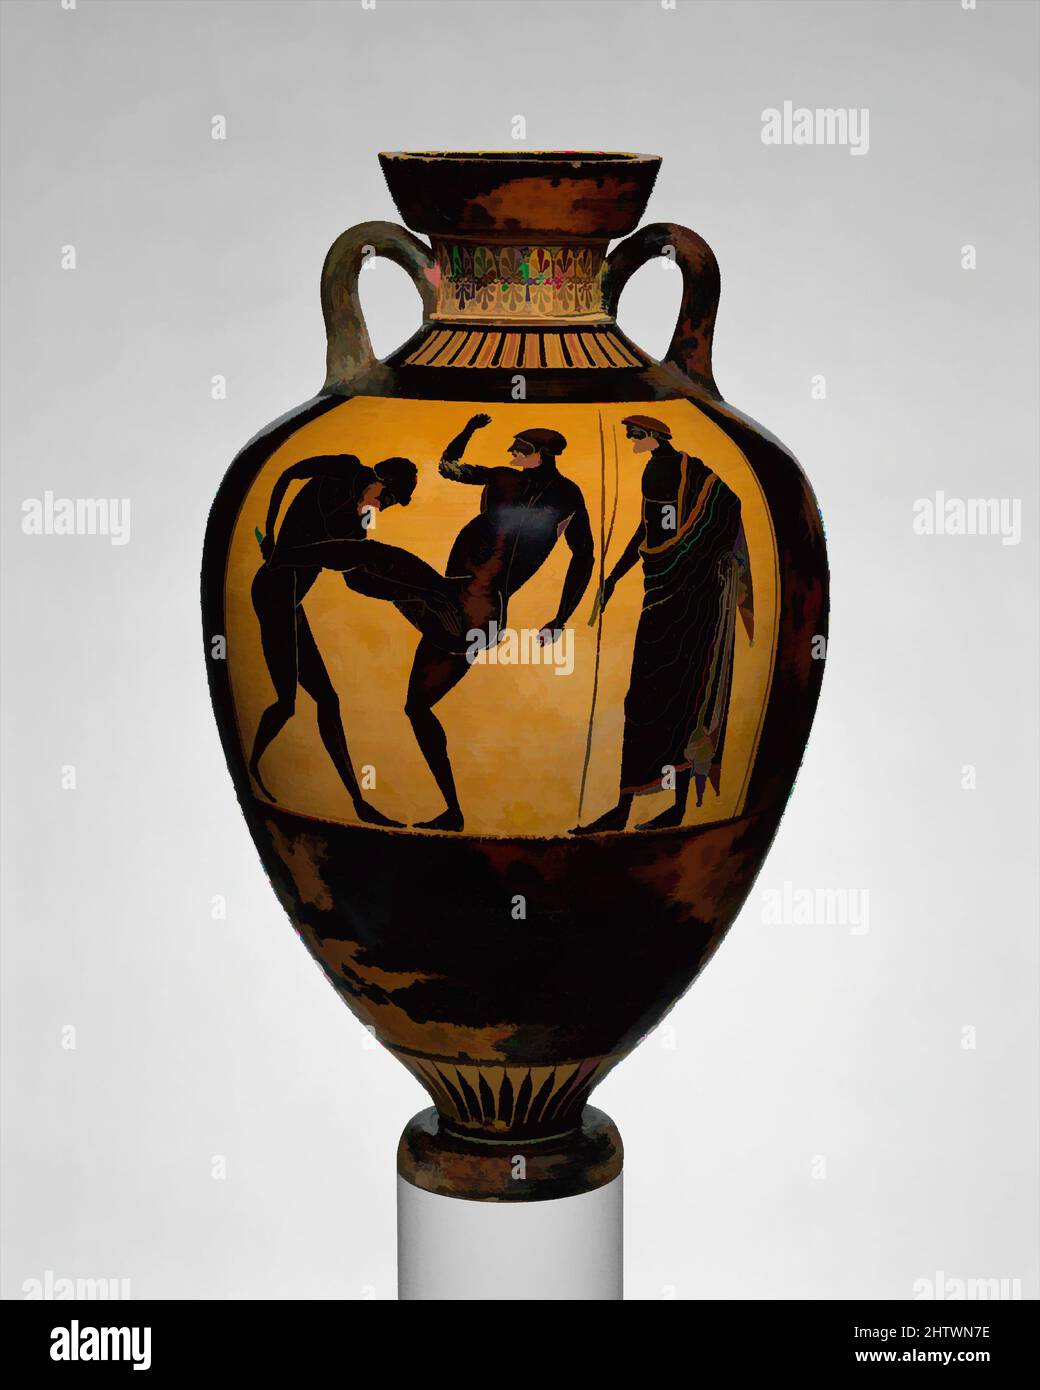 Art inspired by Terracotta Panathenaic prize amphora, Archaic, ca. 500 B.C., Greek, Attic, Terracotta; black-figure, H: 25 in. (63.5 cm), Vases, Obverse, Athena, Reverse, pankration (athletic contest) and judge. After the mid-sixth century B.C., artists' signatures do not appear on, Classic works modernized by Artotop with a splash of modernity. Shapes, color and value, eye-catching visual impact on art. Emotions through freedom of artworks in a contemporary way. A timeless message pursuing a wildly creative new direction. Artists turning to the digital medium and creating the Artotop NFT Stock Photo